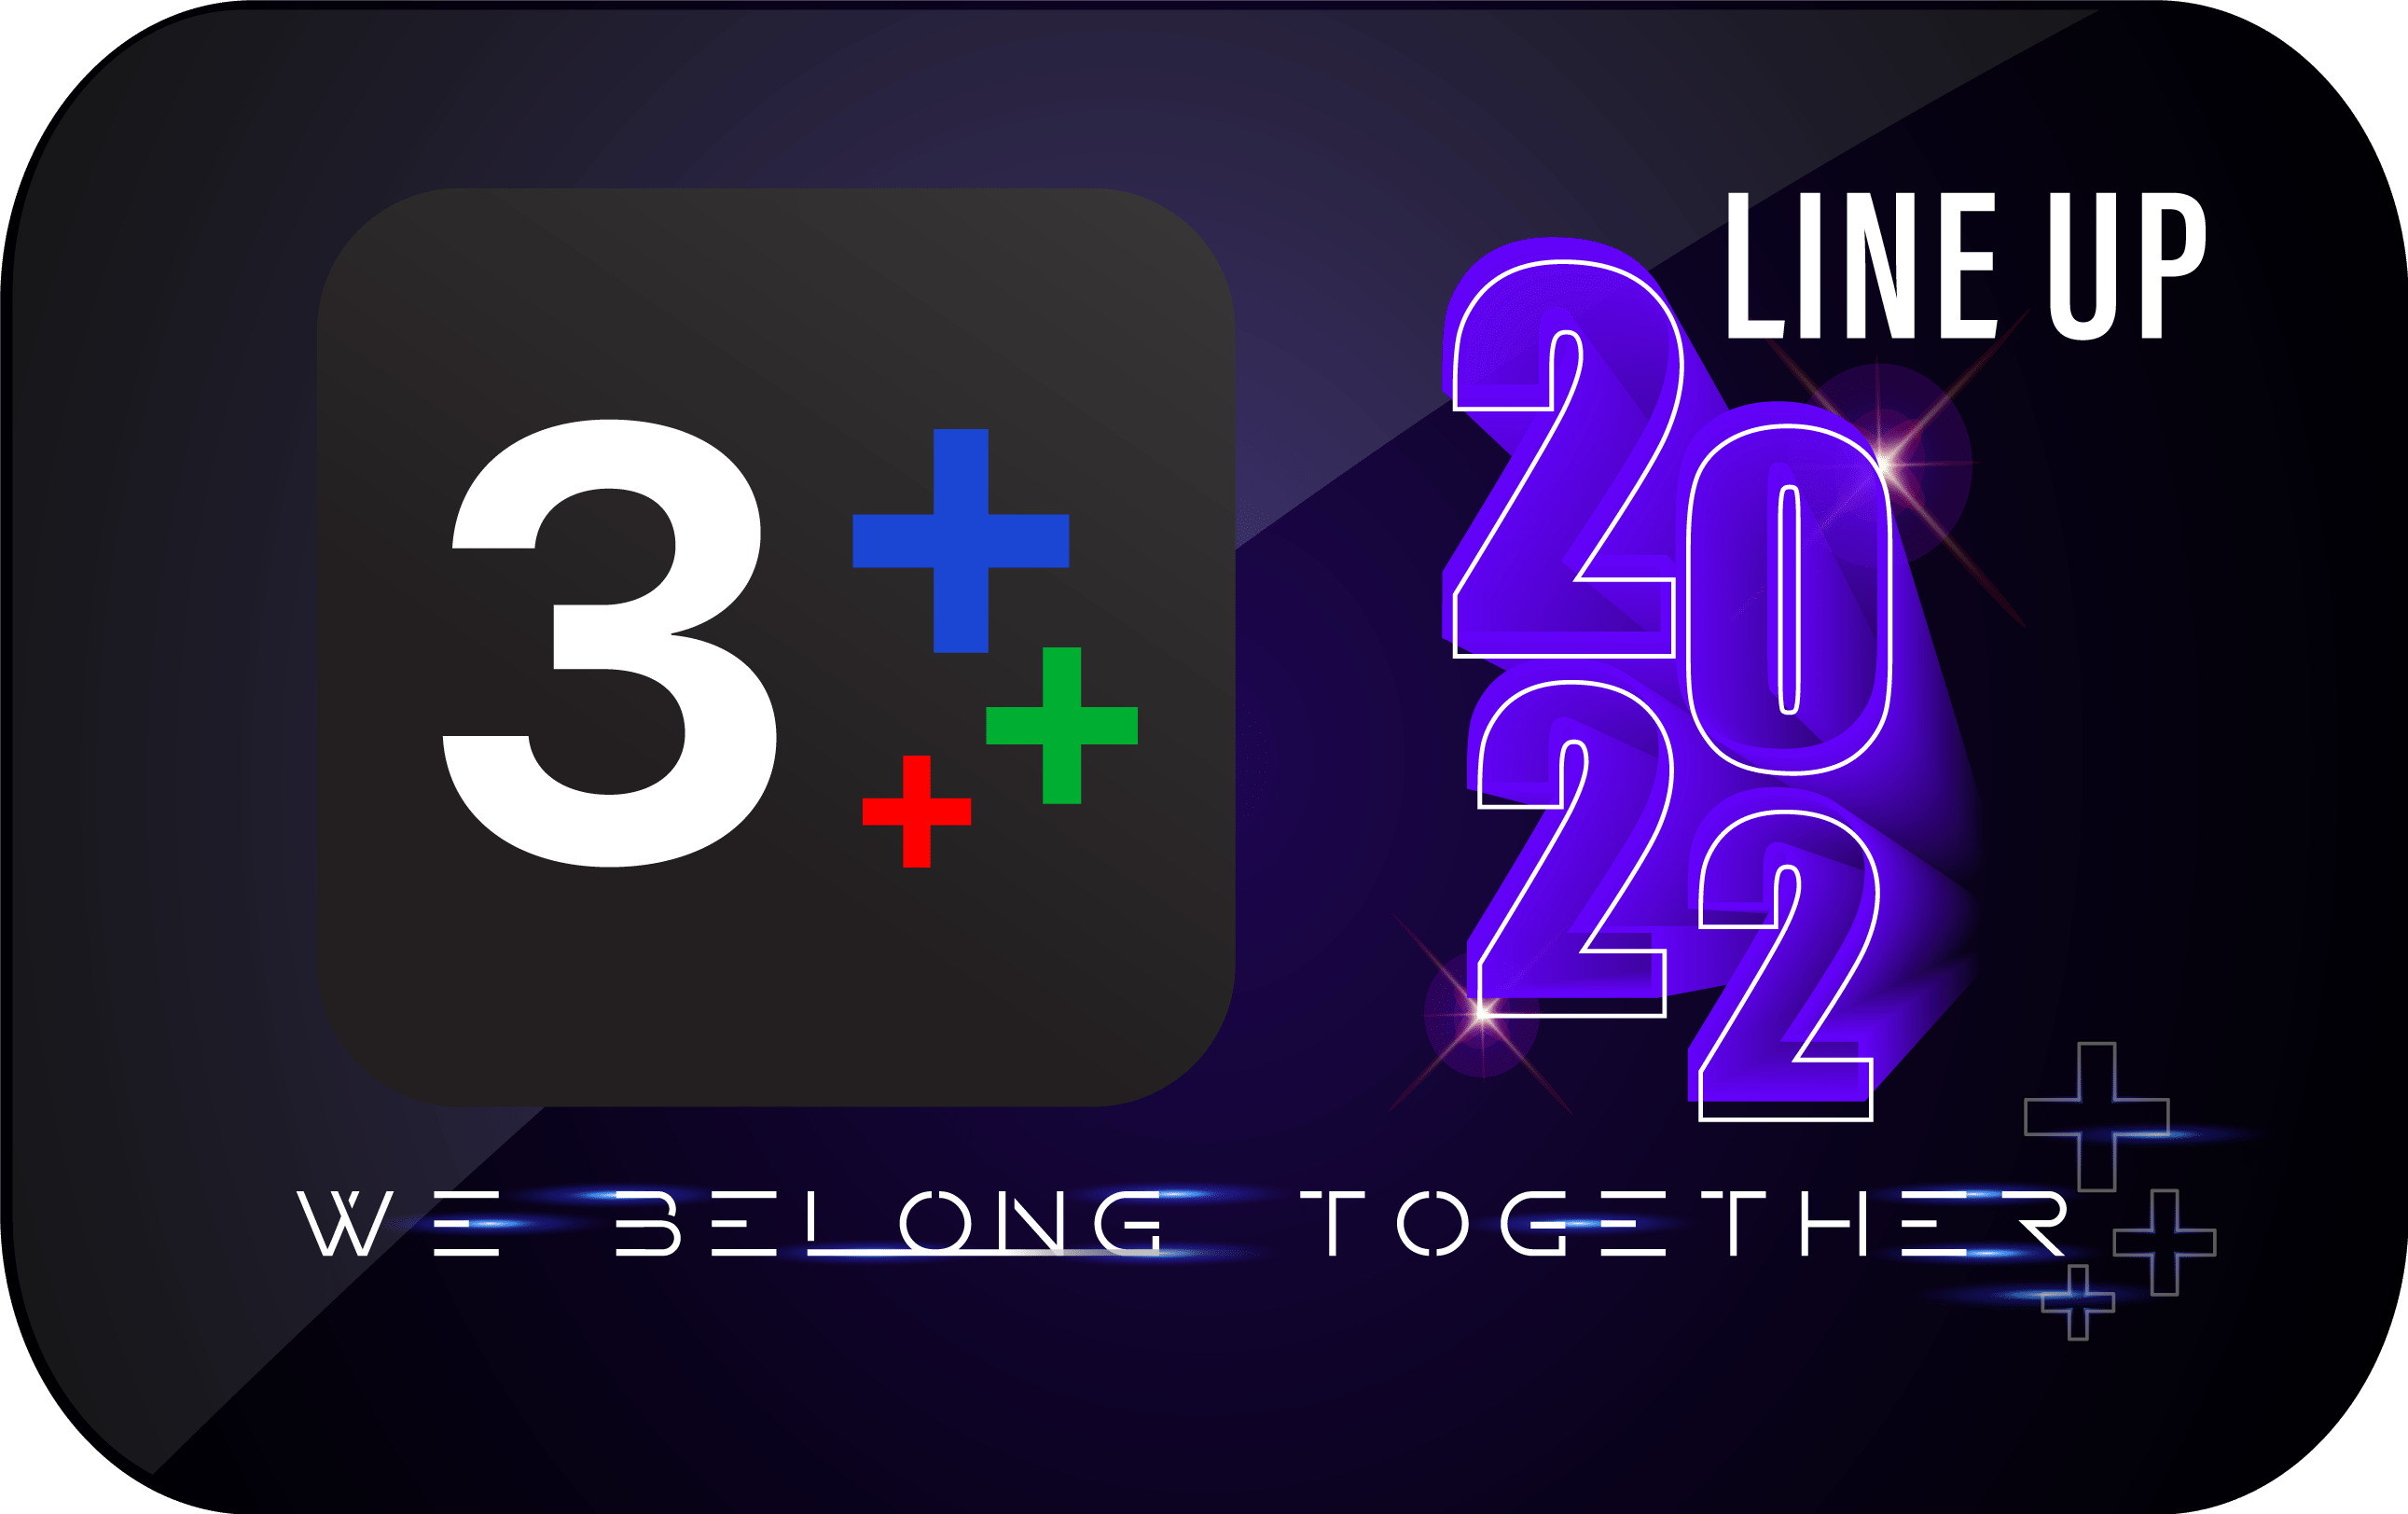 3Plus announced line up programs and activities for second half of 2022